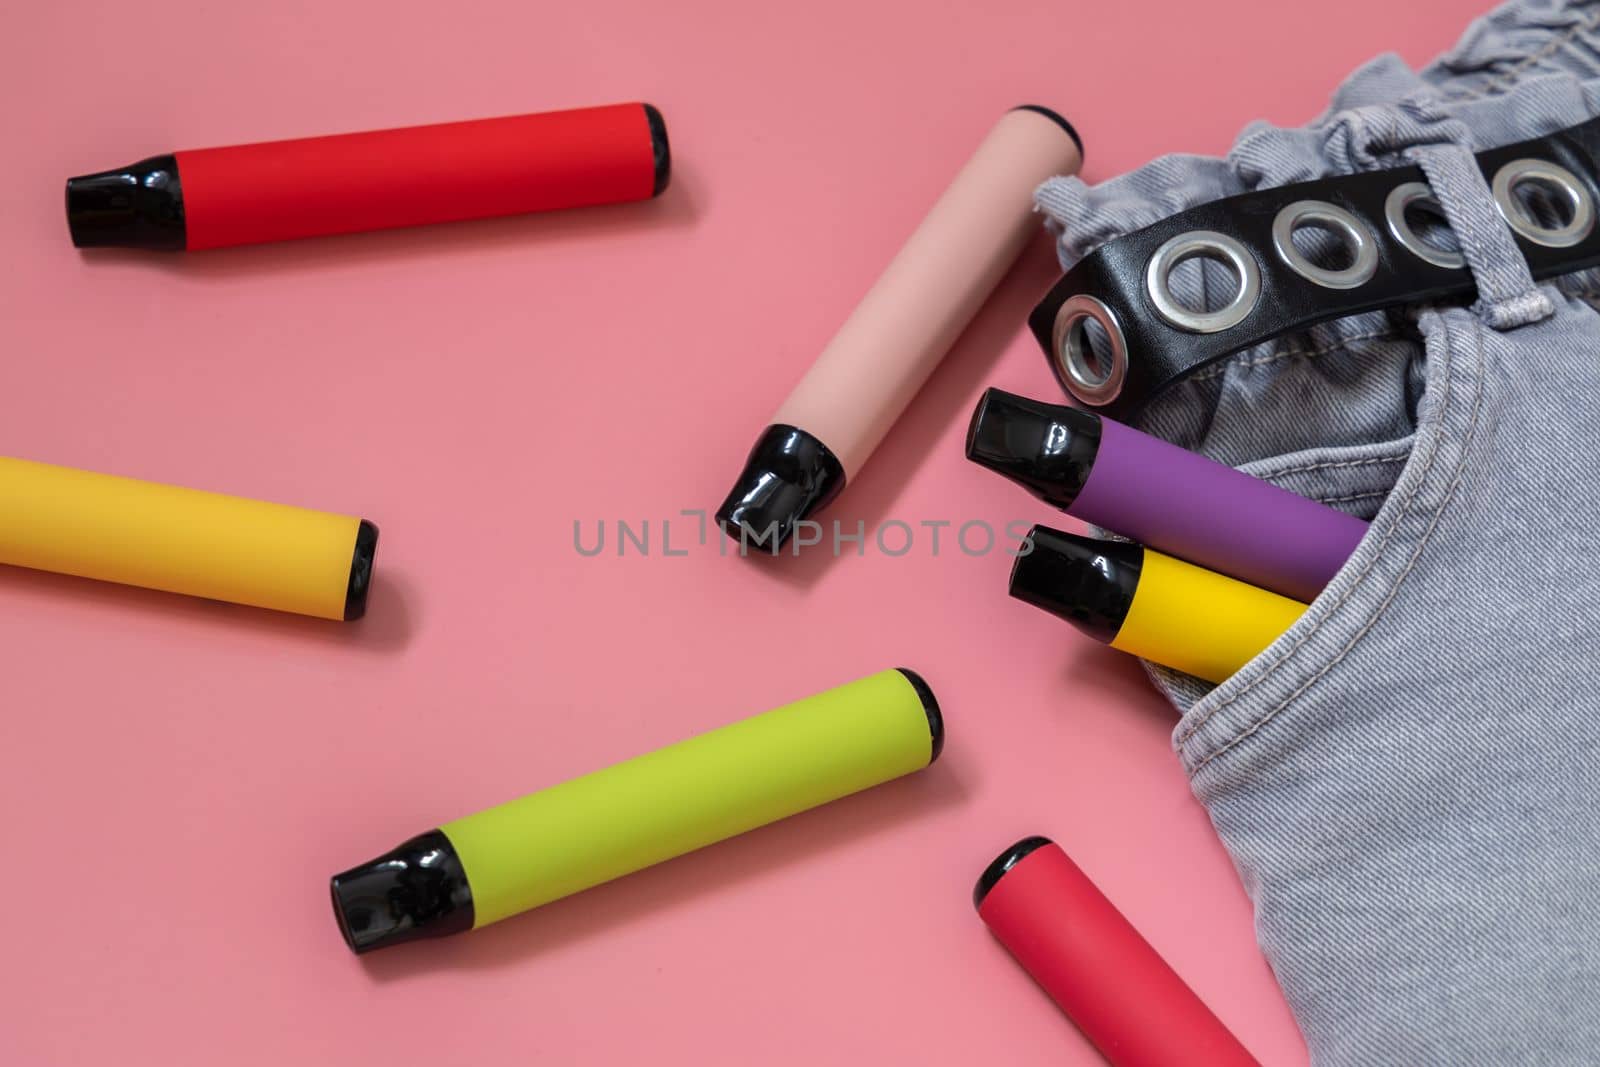 Layout of colorful disposable vapor stick on a light background. Concept of modern e-smoking, vaping and nicotine, electronic cigarettes